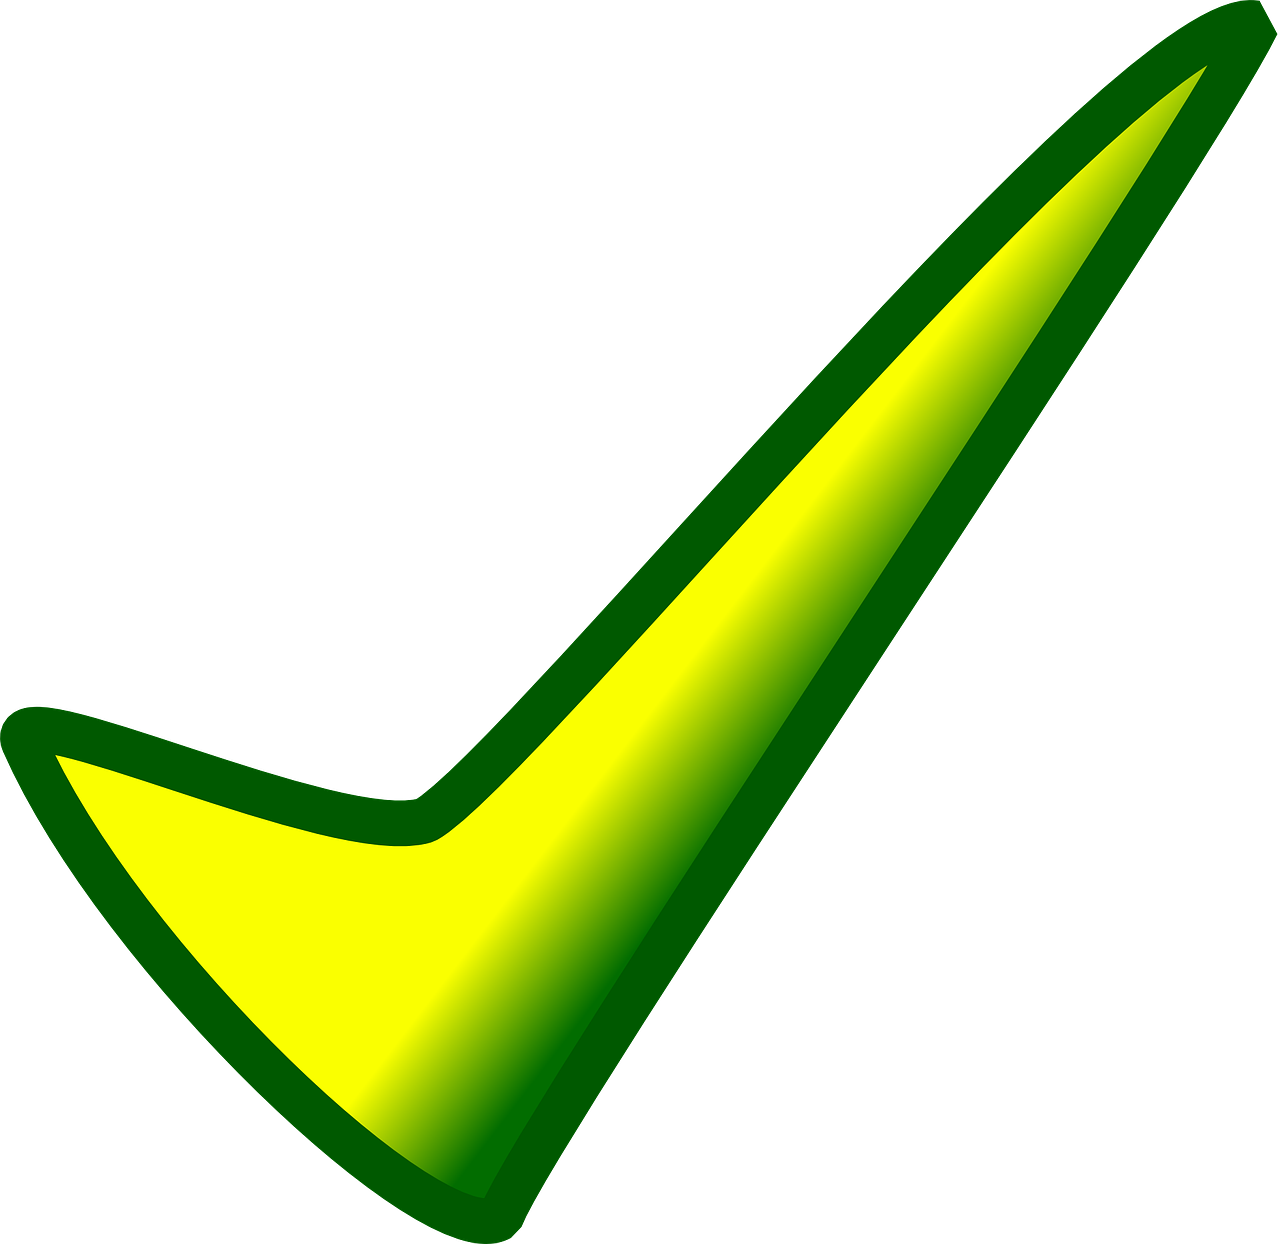 Affirmative Action Checkmark in yellow and green.